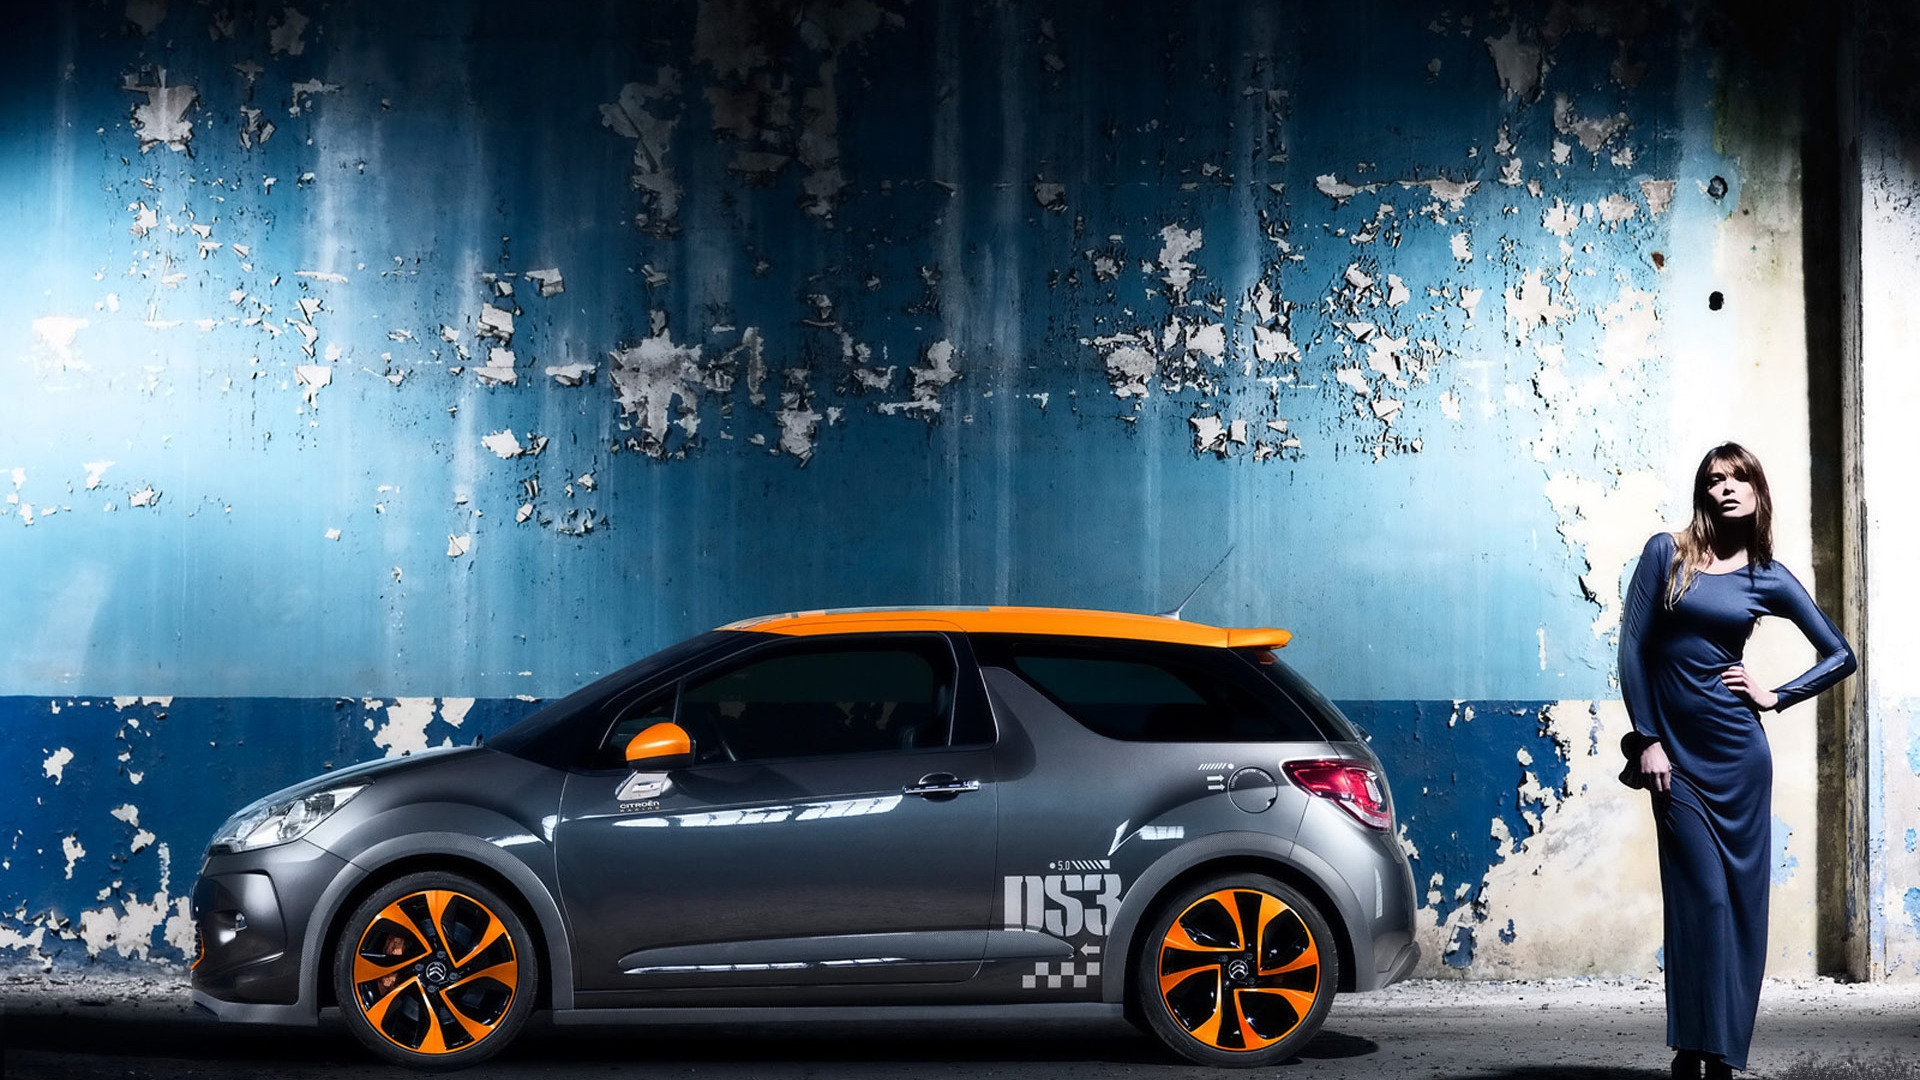 Cool Citroen DS3 Side Angle for 1920 x 1080 HDTV 1080p resolution